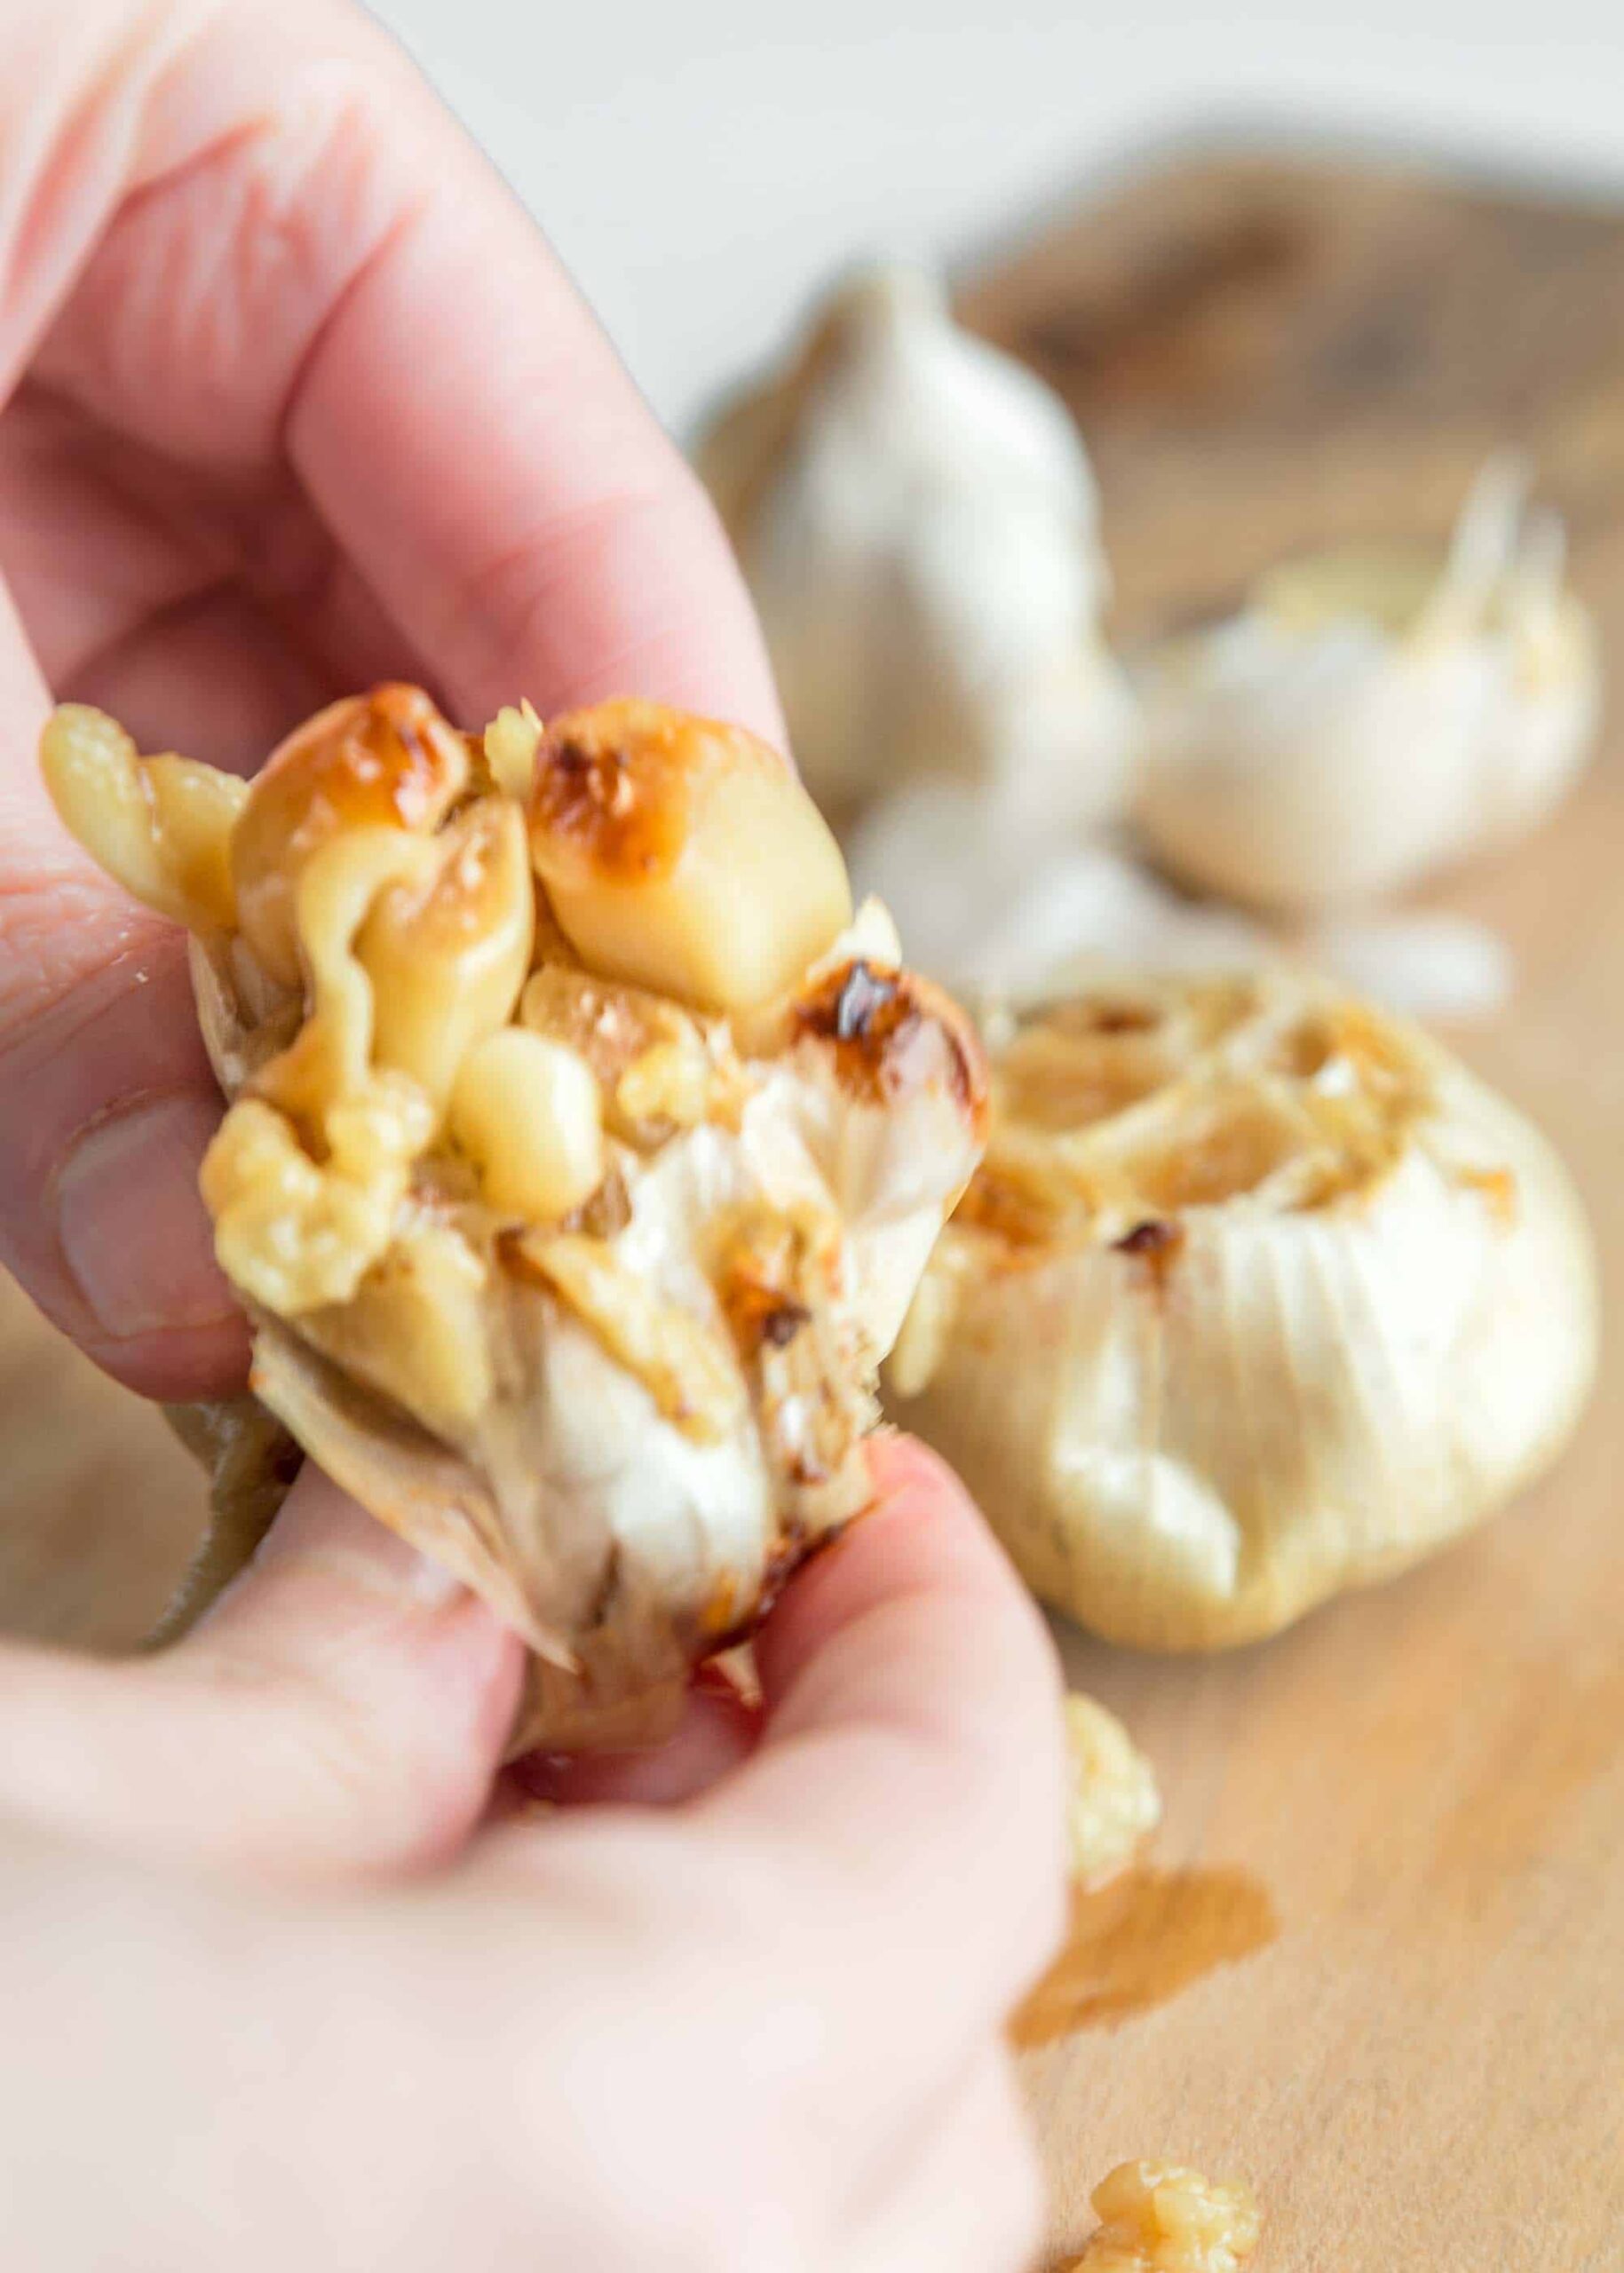 Squeezing Out Roasted Garlic With Your Hands